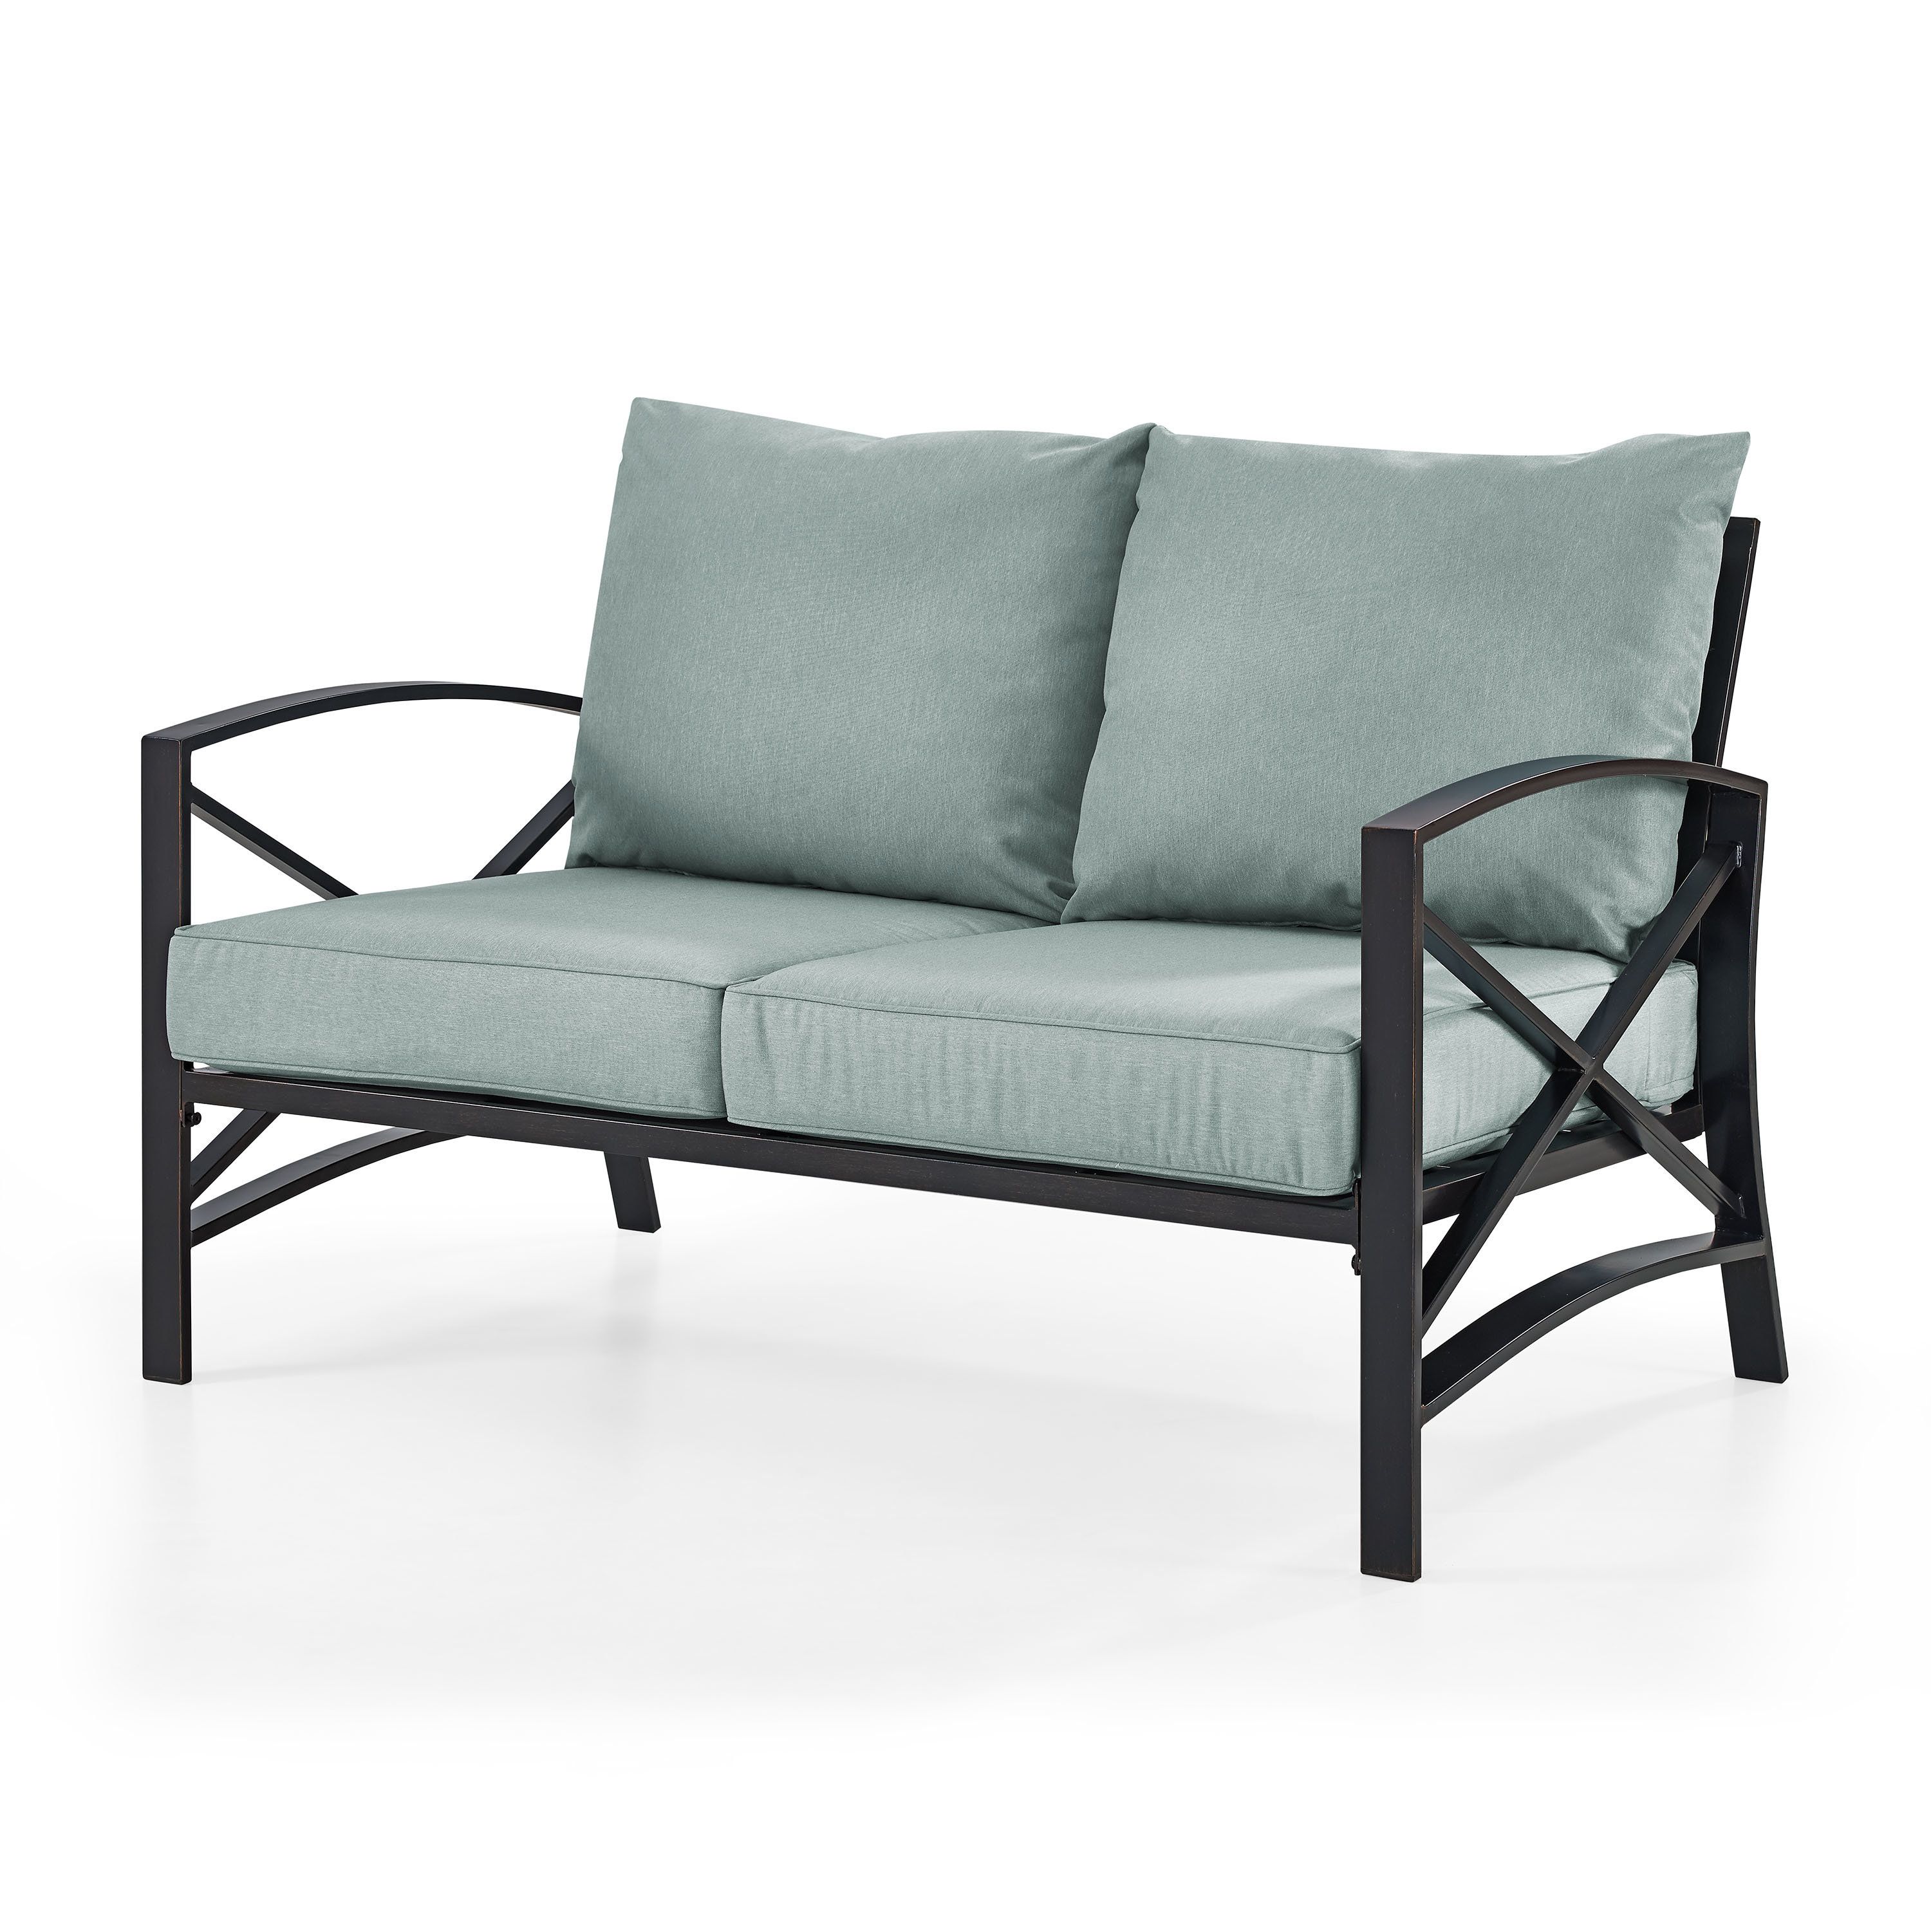 Well Liked Ivy Bronx Freitag Loveseat With Cushions Pertaining To Freitag Loveseats With Cushions (View 6 of 20)